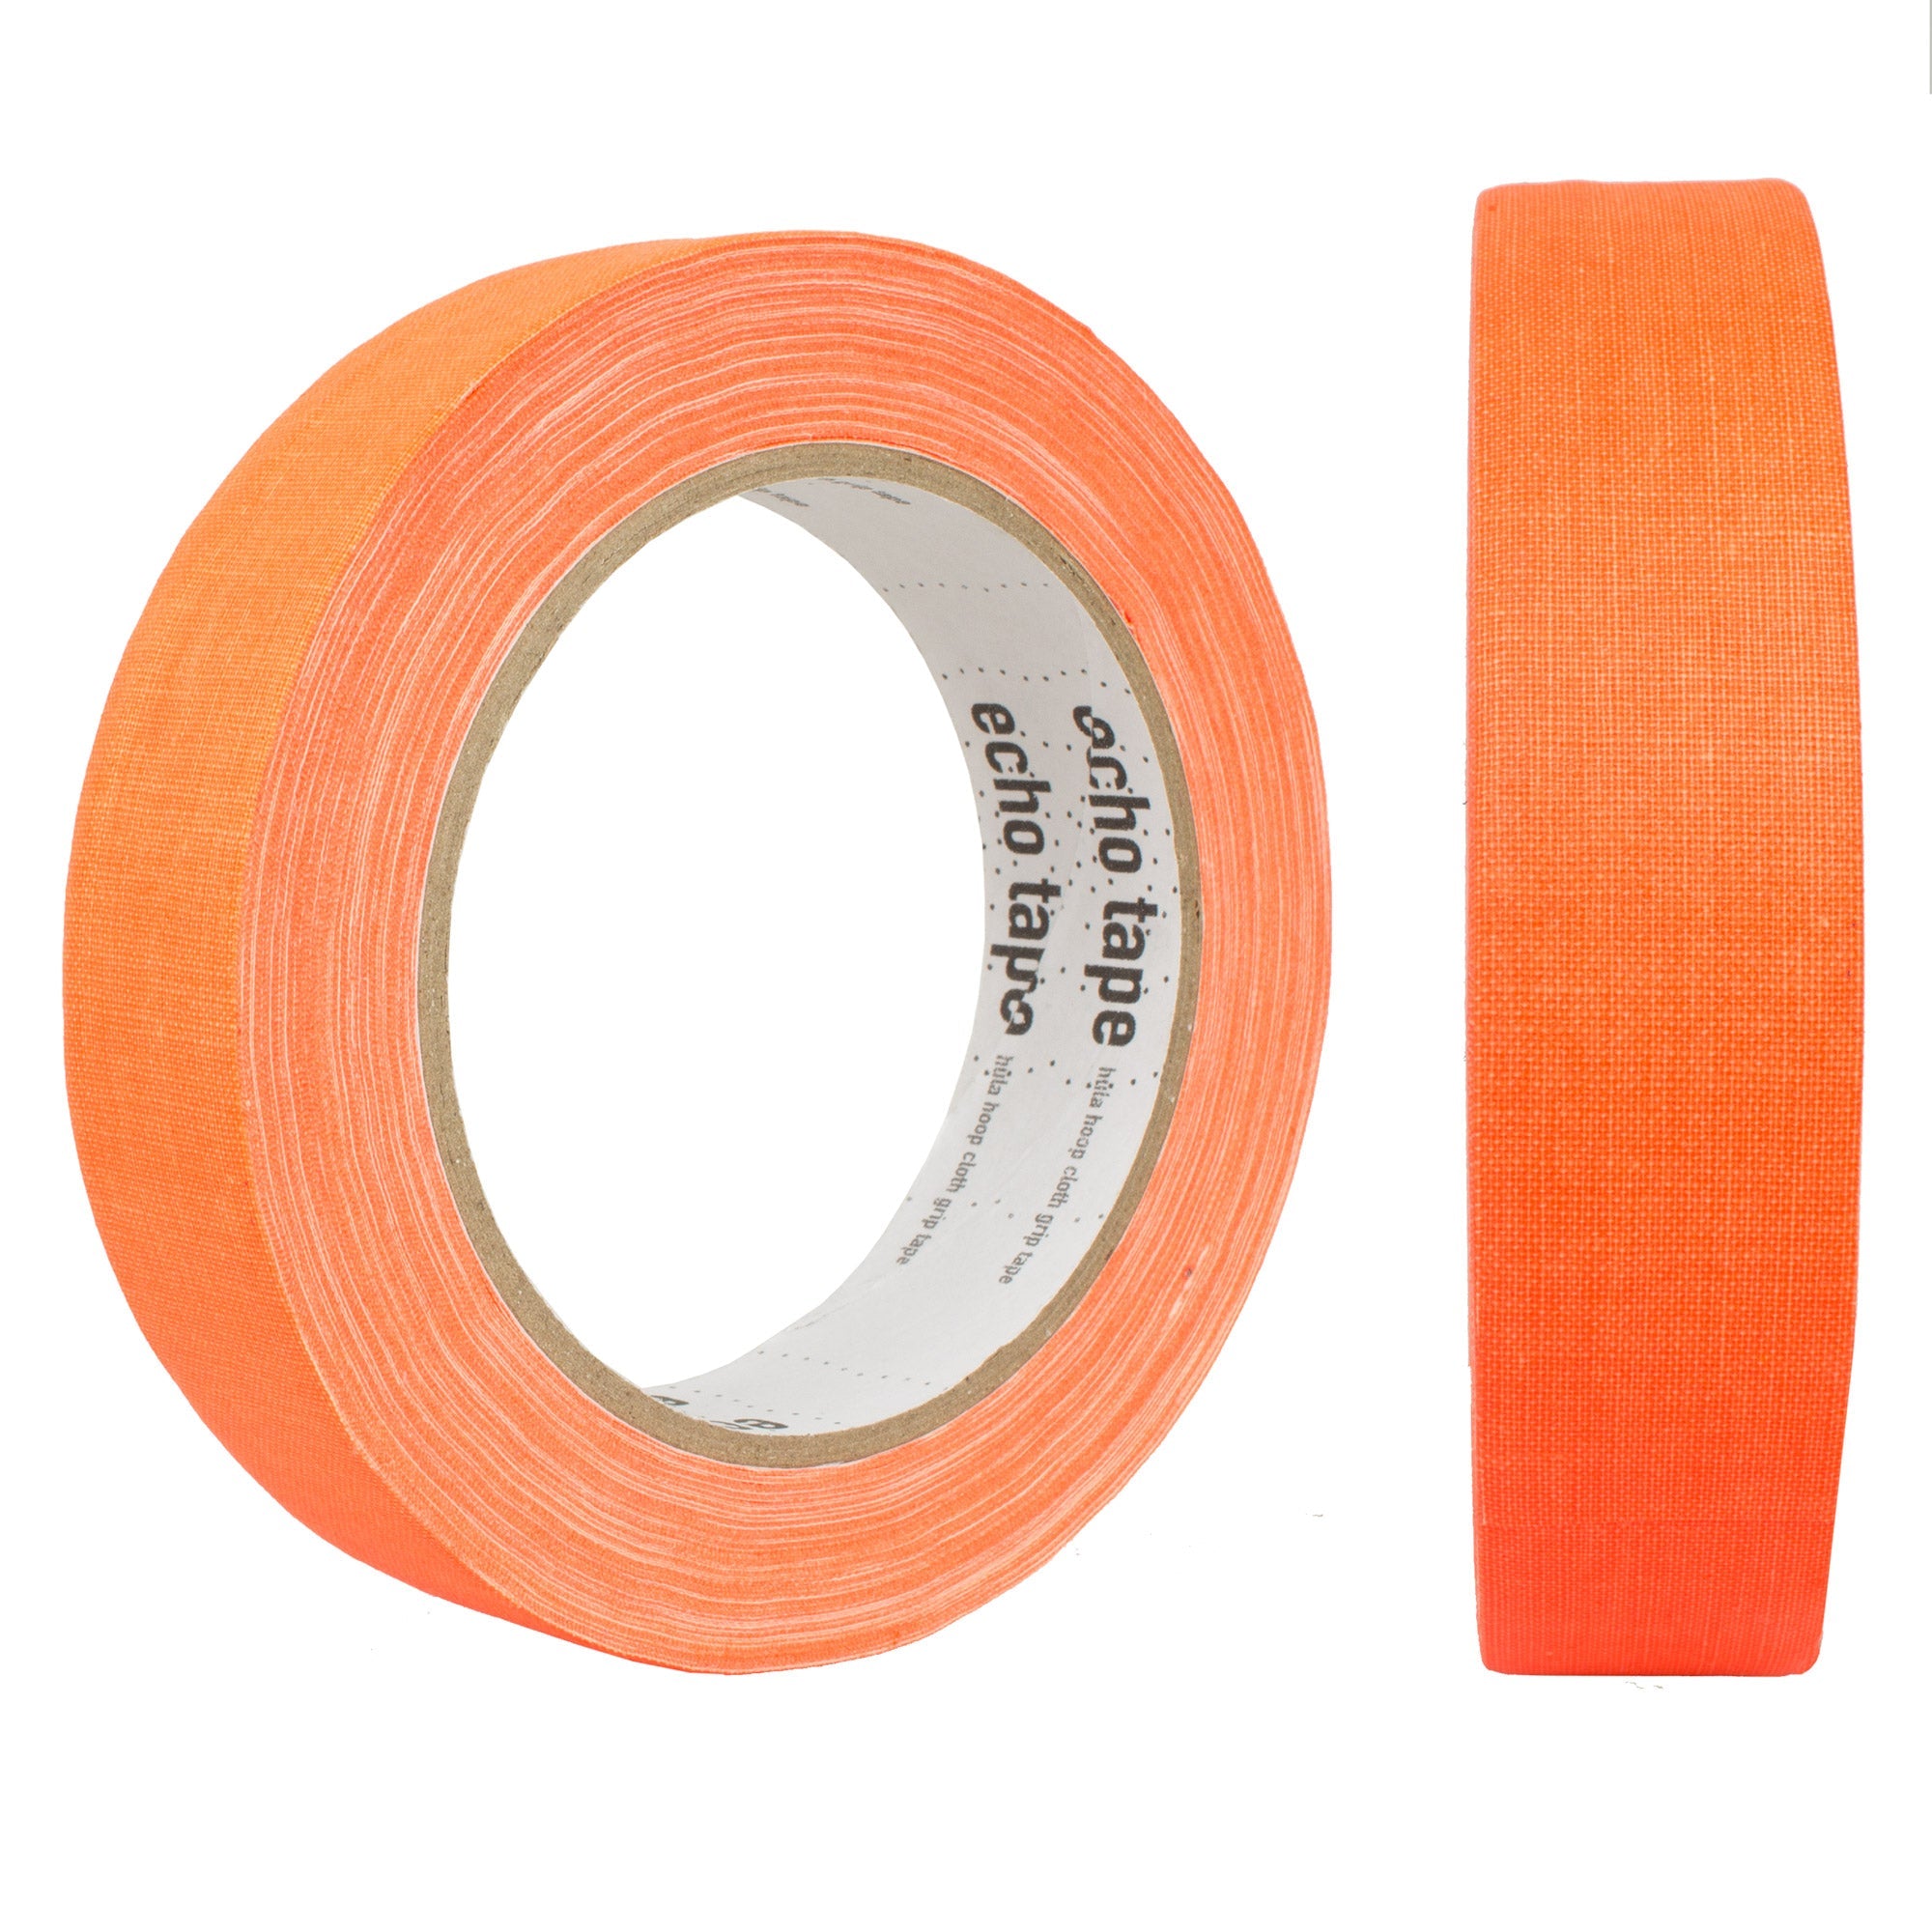 a roll of UV orange tape from two angles